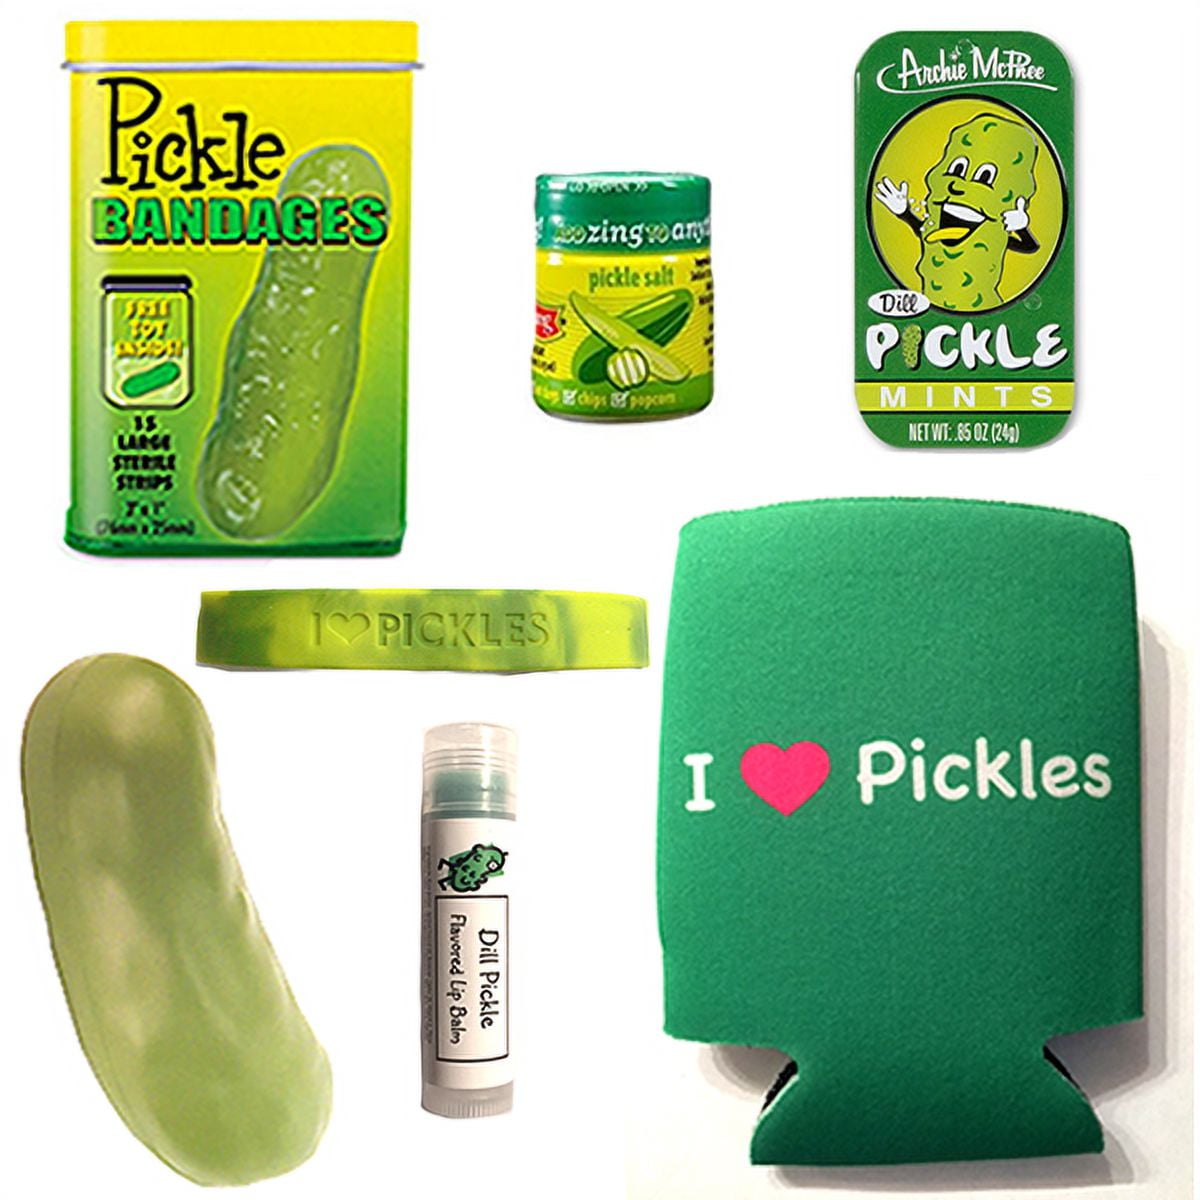 Deluxe Pickle Lovers Gift Pack 7pc Set - Pickle Bandages, Lip Balm, Magnet, Stress Pickle, Can Cooler Insulator, Wristband & Dill Pickle Salt